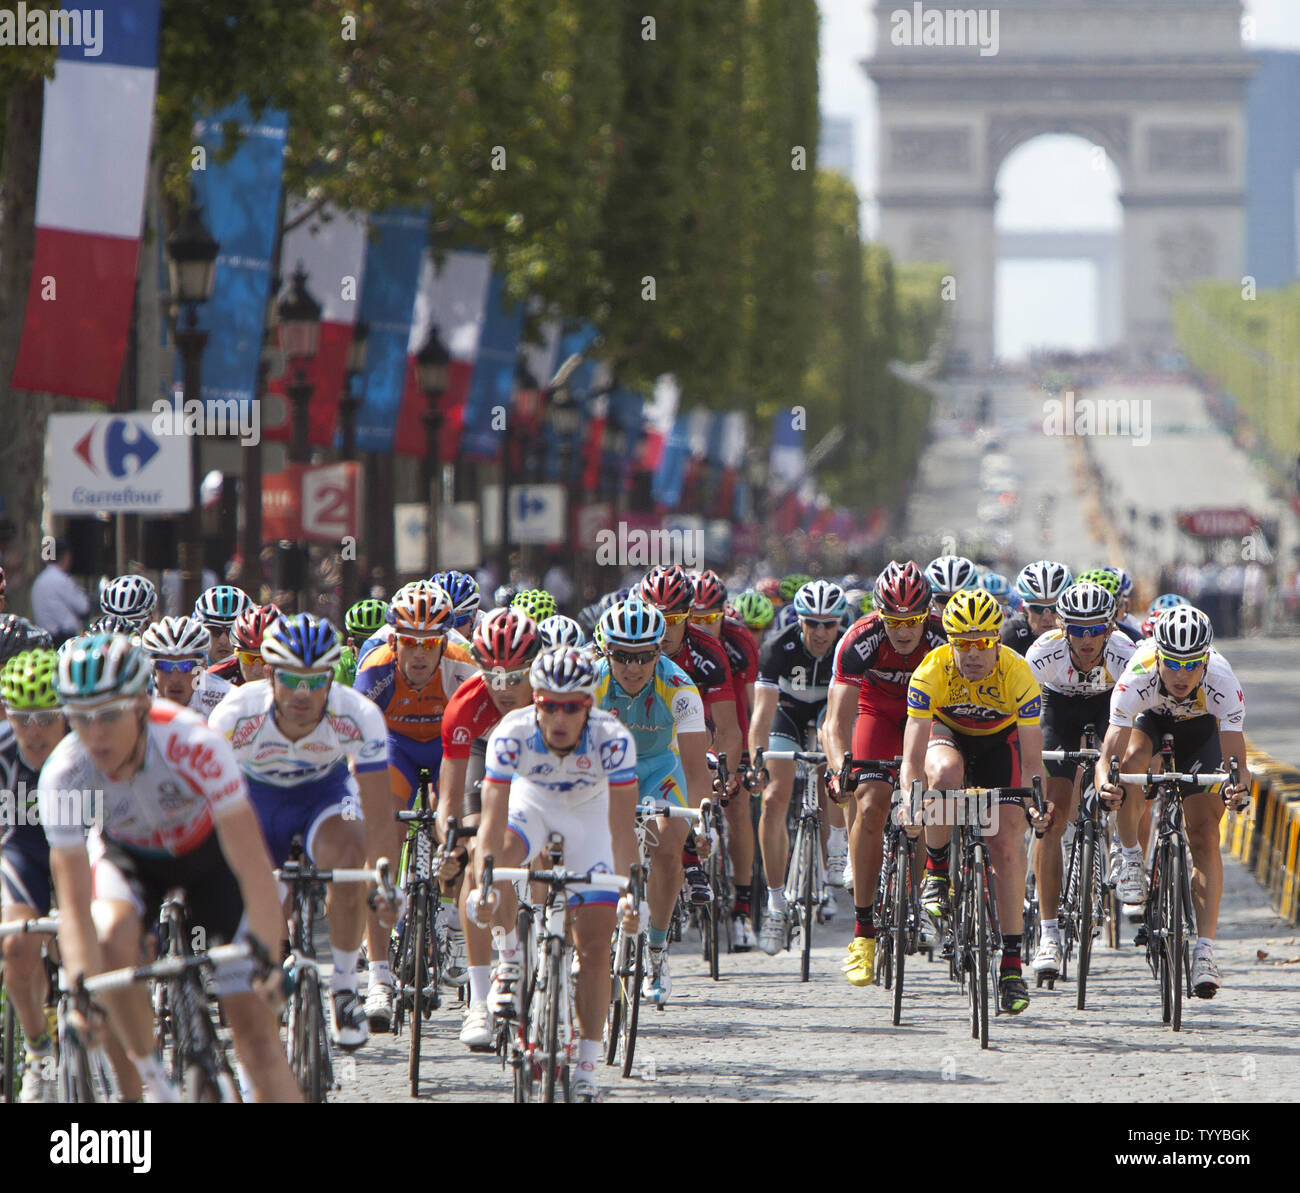 Australian Cadel Evans (yellow jersey) rides along the Champs-Elysees en route to winning his first Tour de France title in Paris on July 24, 2011.  Evans became the first Australian ever to win the Tour de France.   UPI/David Silpa Stock Photo